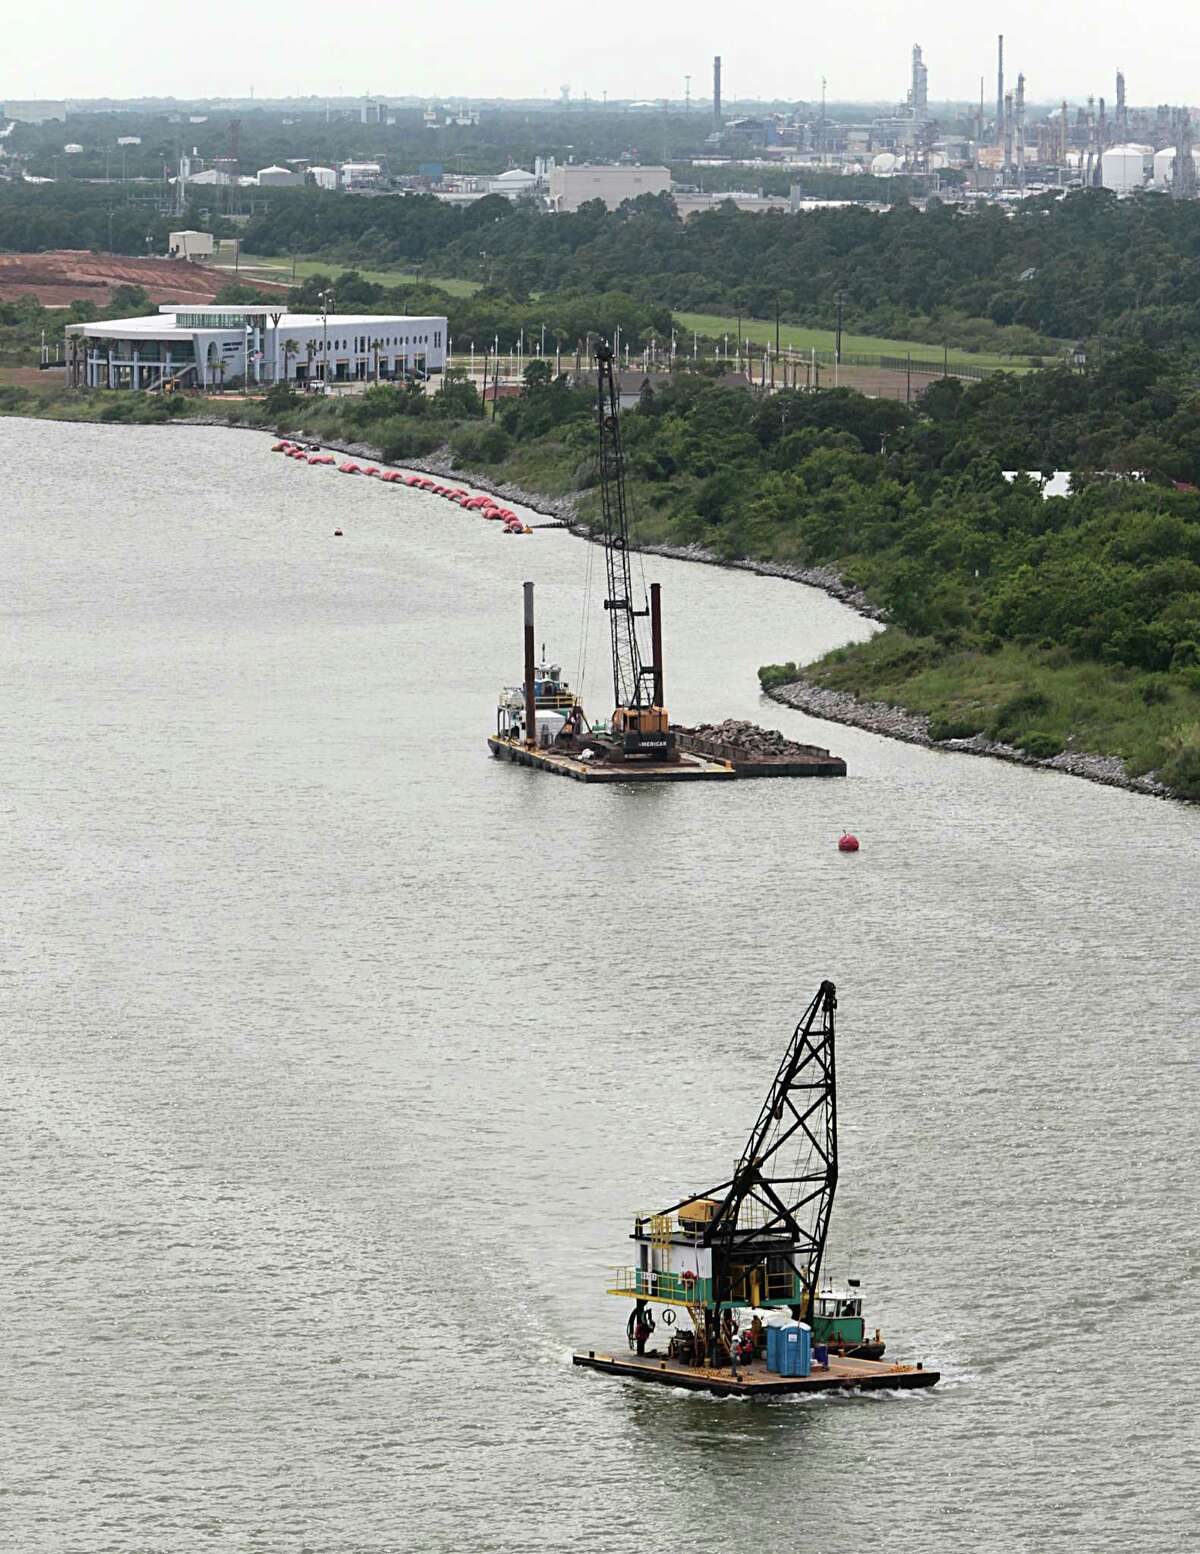 Dredging work continues in June near the ﻿Bayport Container Terminal﻿. Regular dredging is essential to maintaining the Ship Channel's depth.